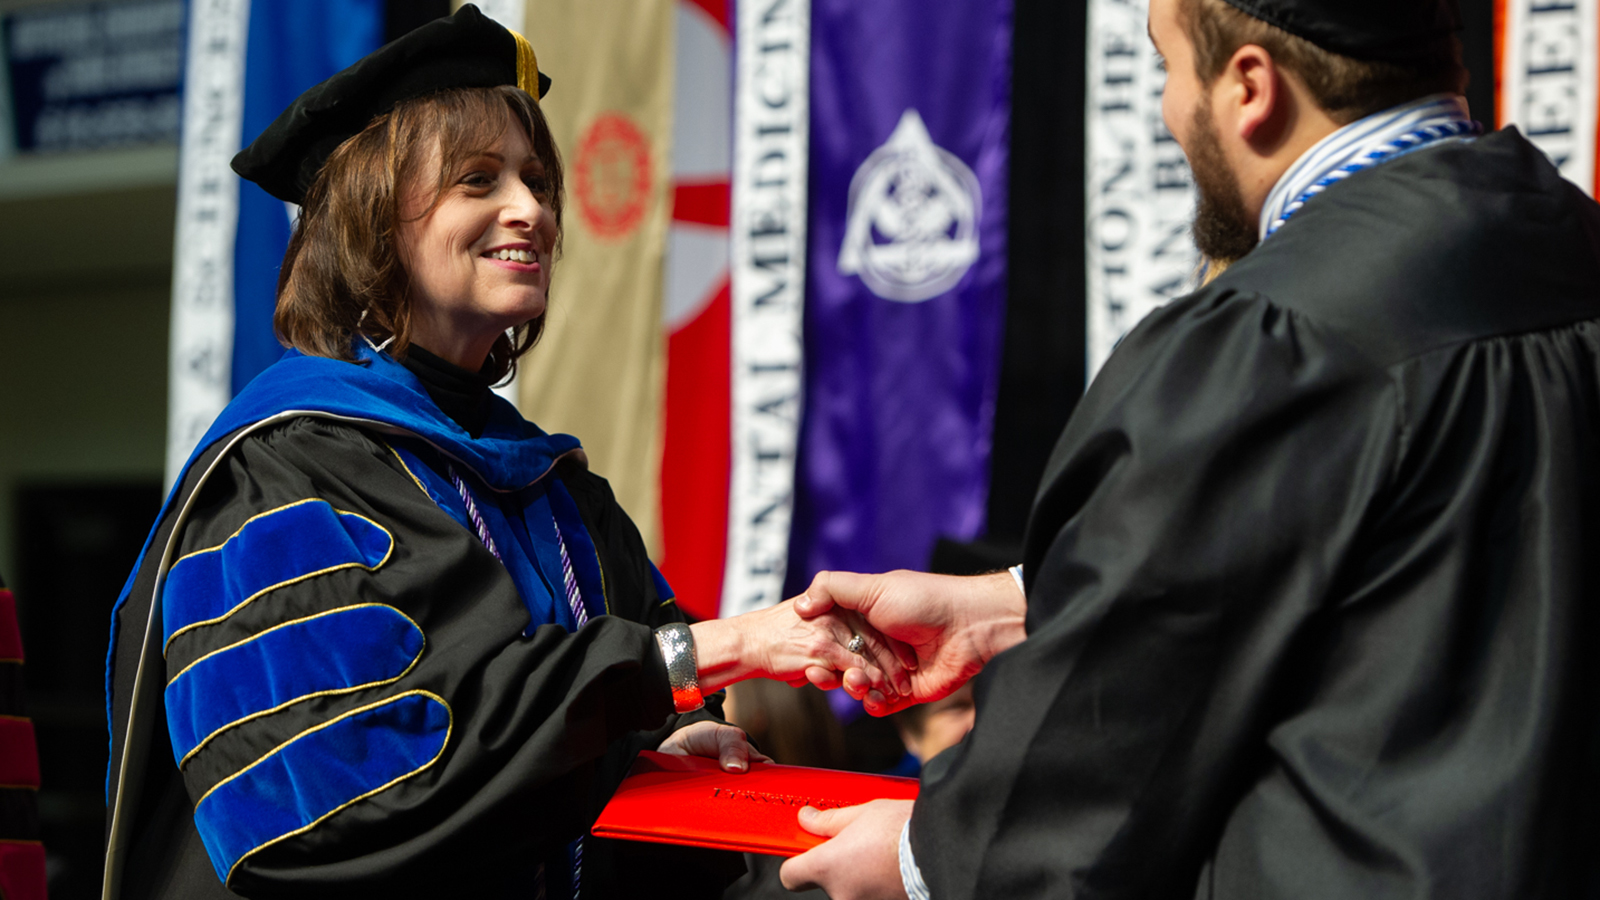 Dean Bernaix shaking graduate's hands from previous ceremony